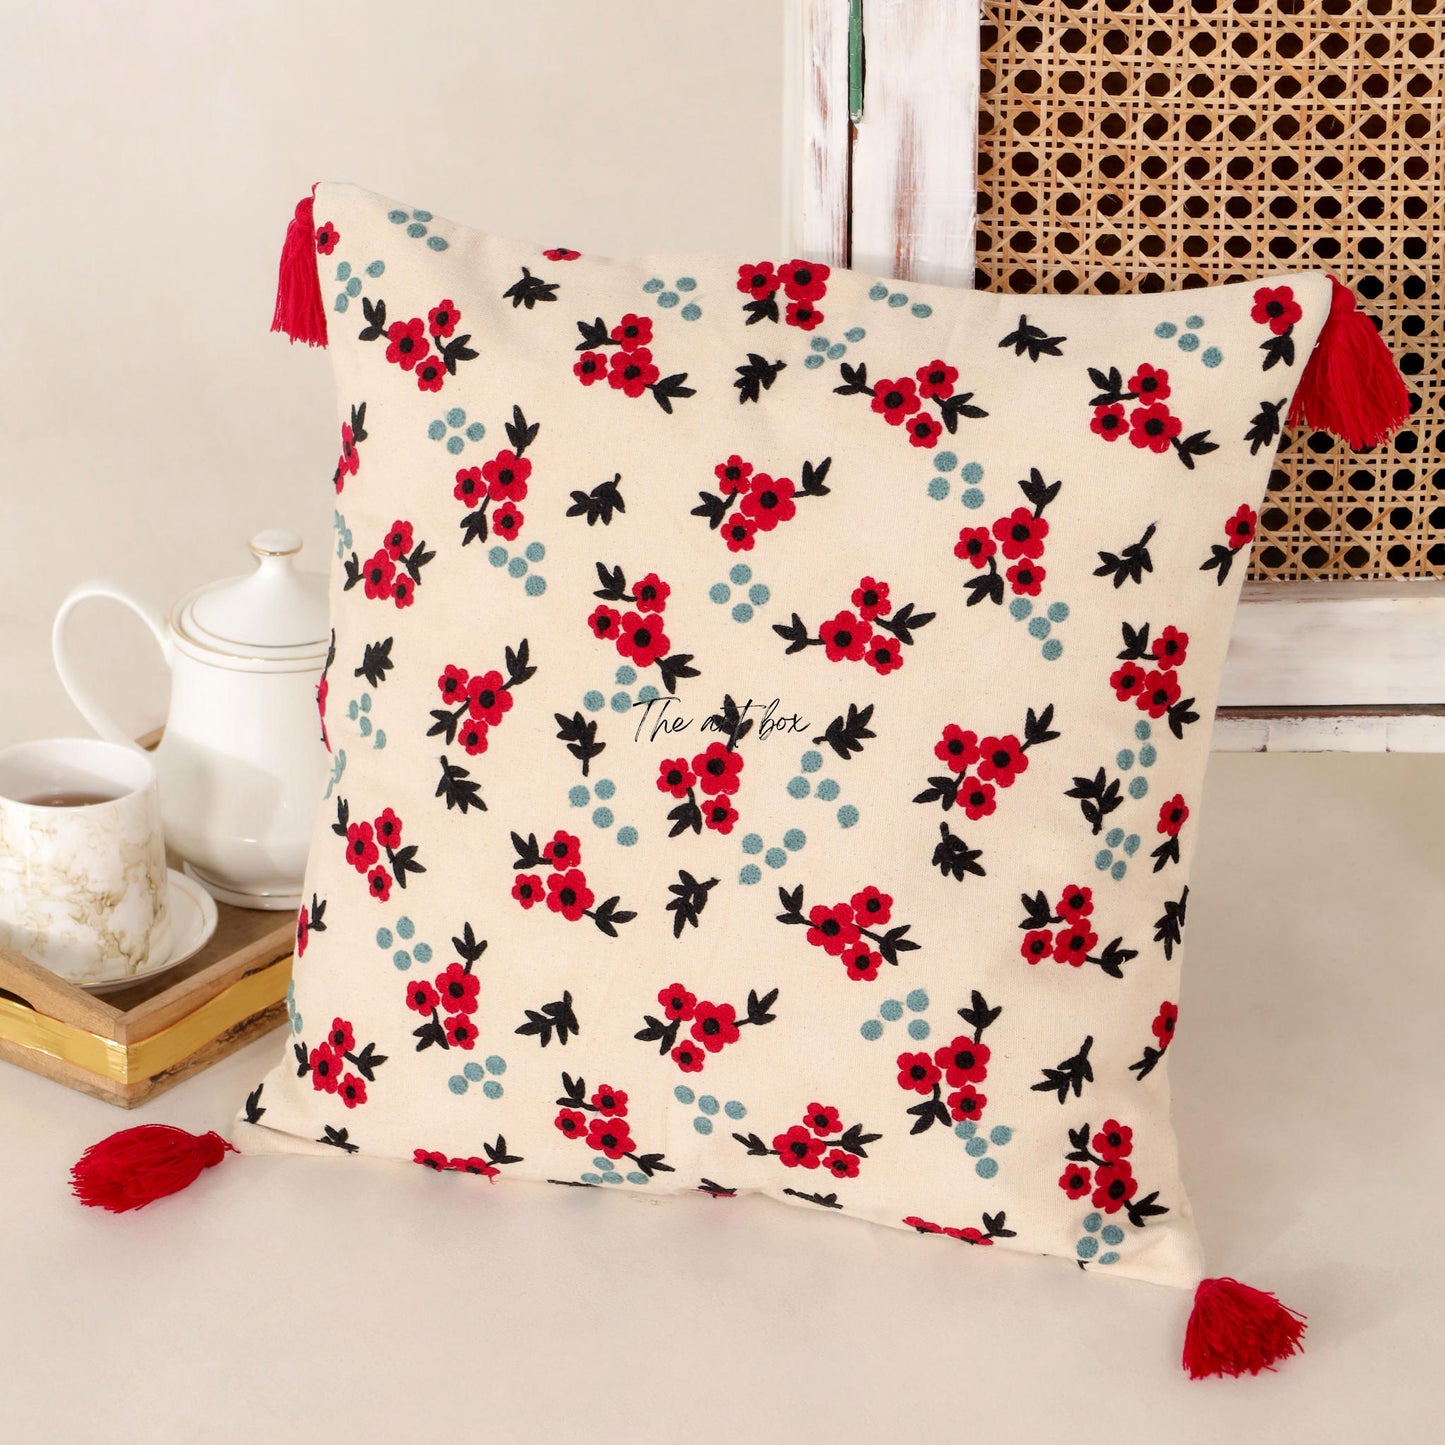 Embroidered Flower Decor Pillow Case - Bring Nature Inside